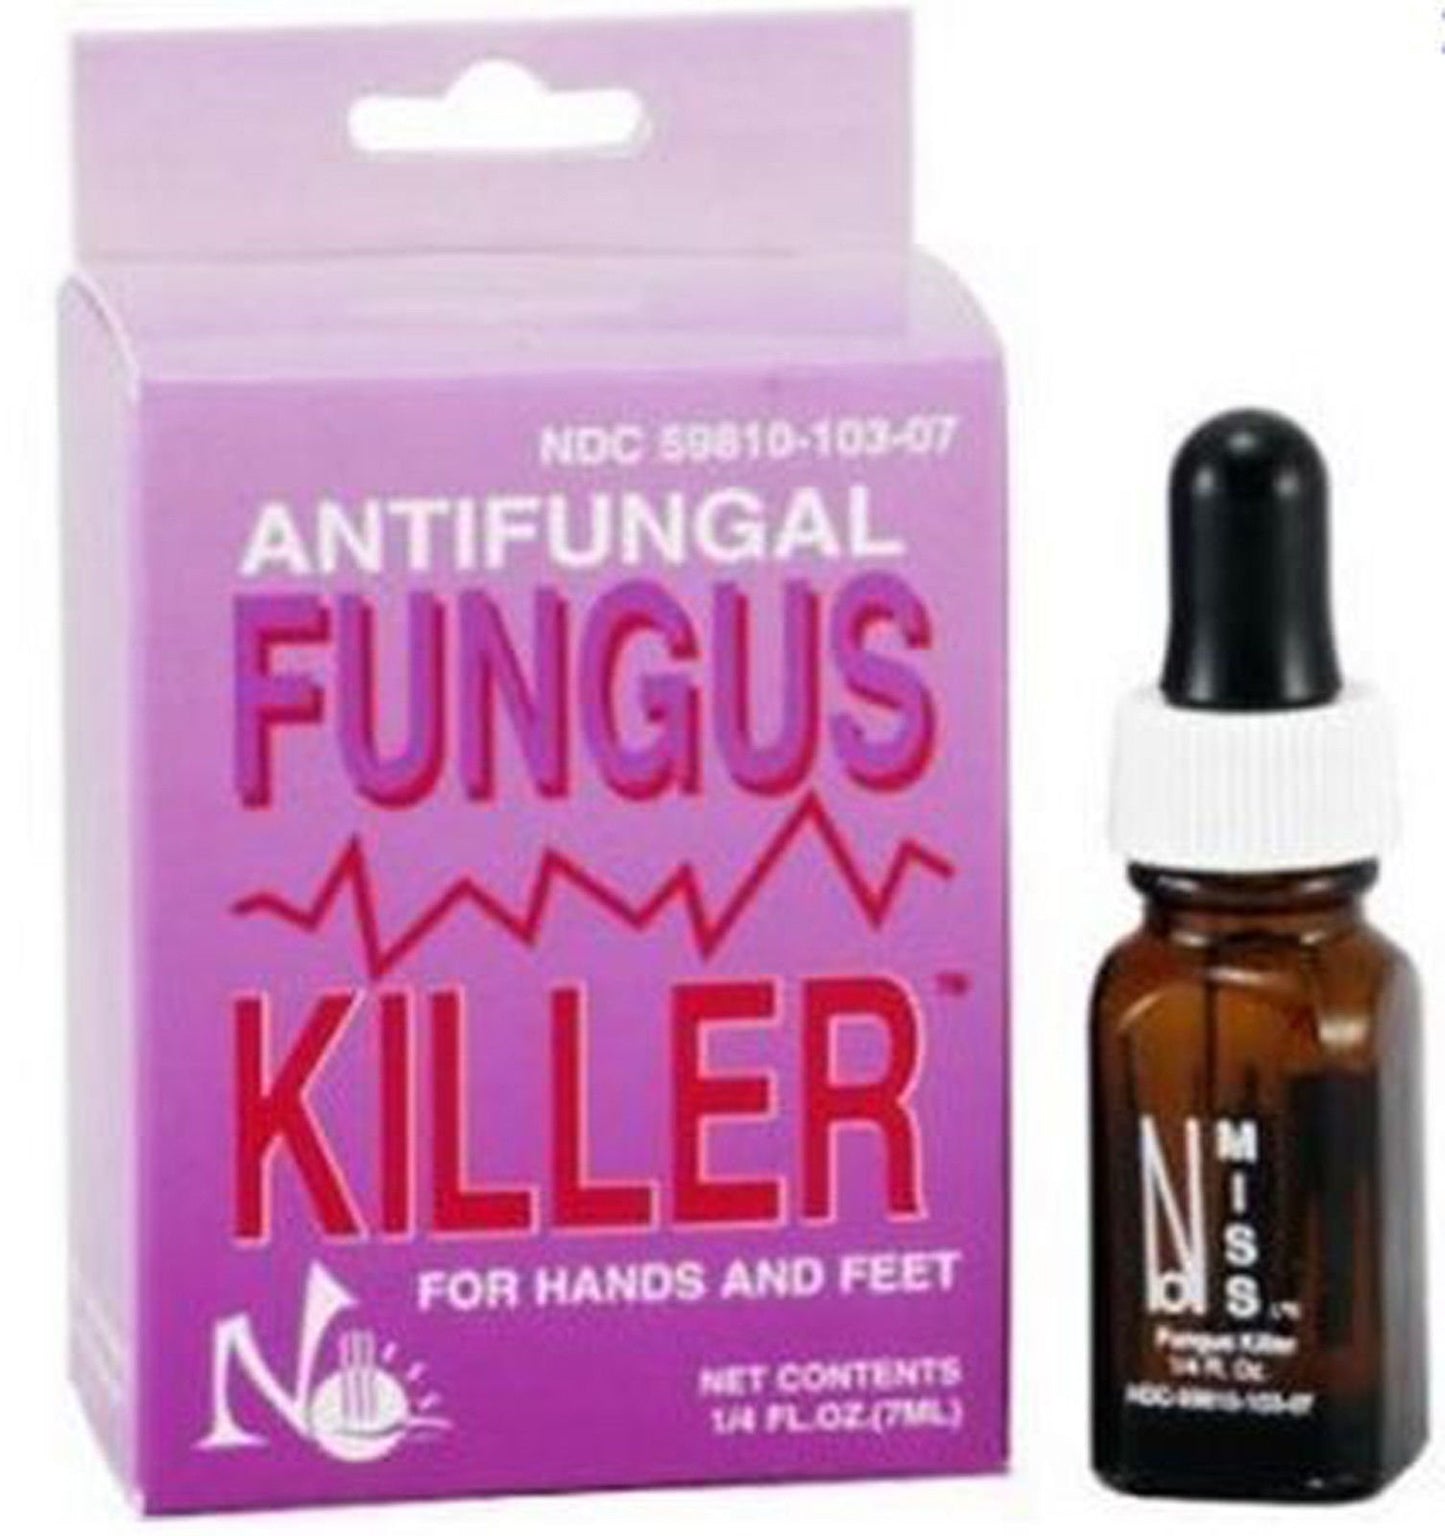 No Miss Anti Fungal Killer For Hands and Feet, 1/4 oz